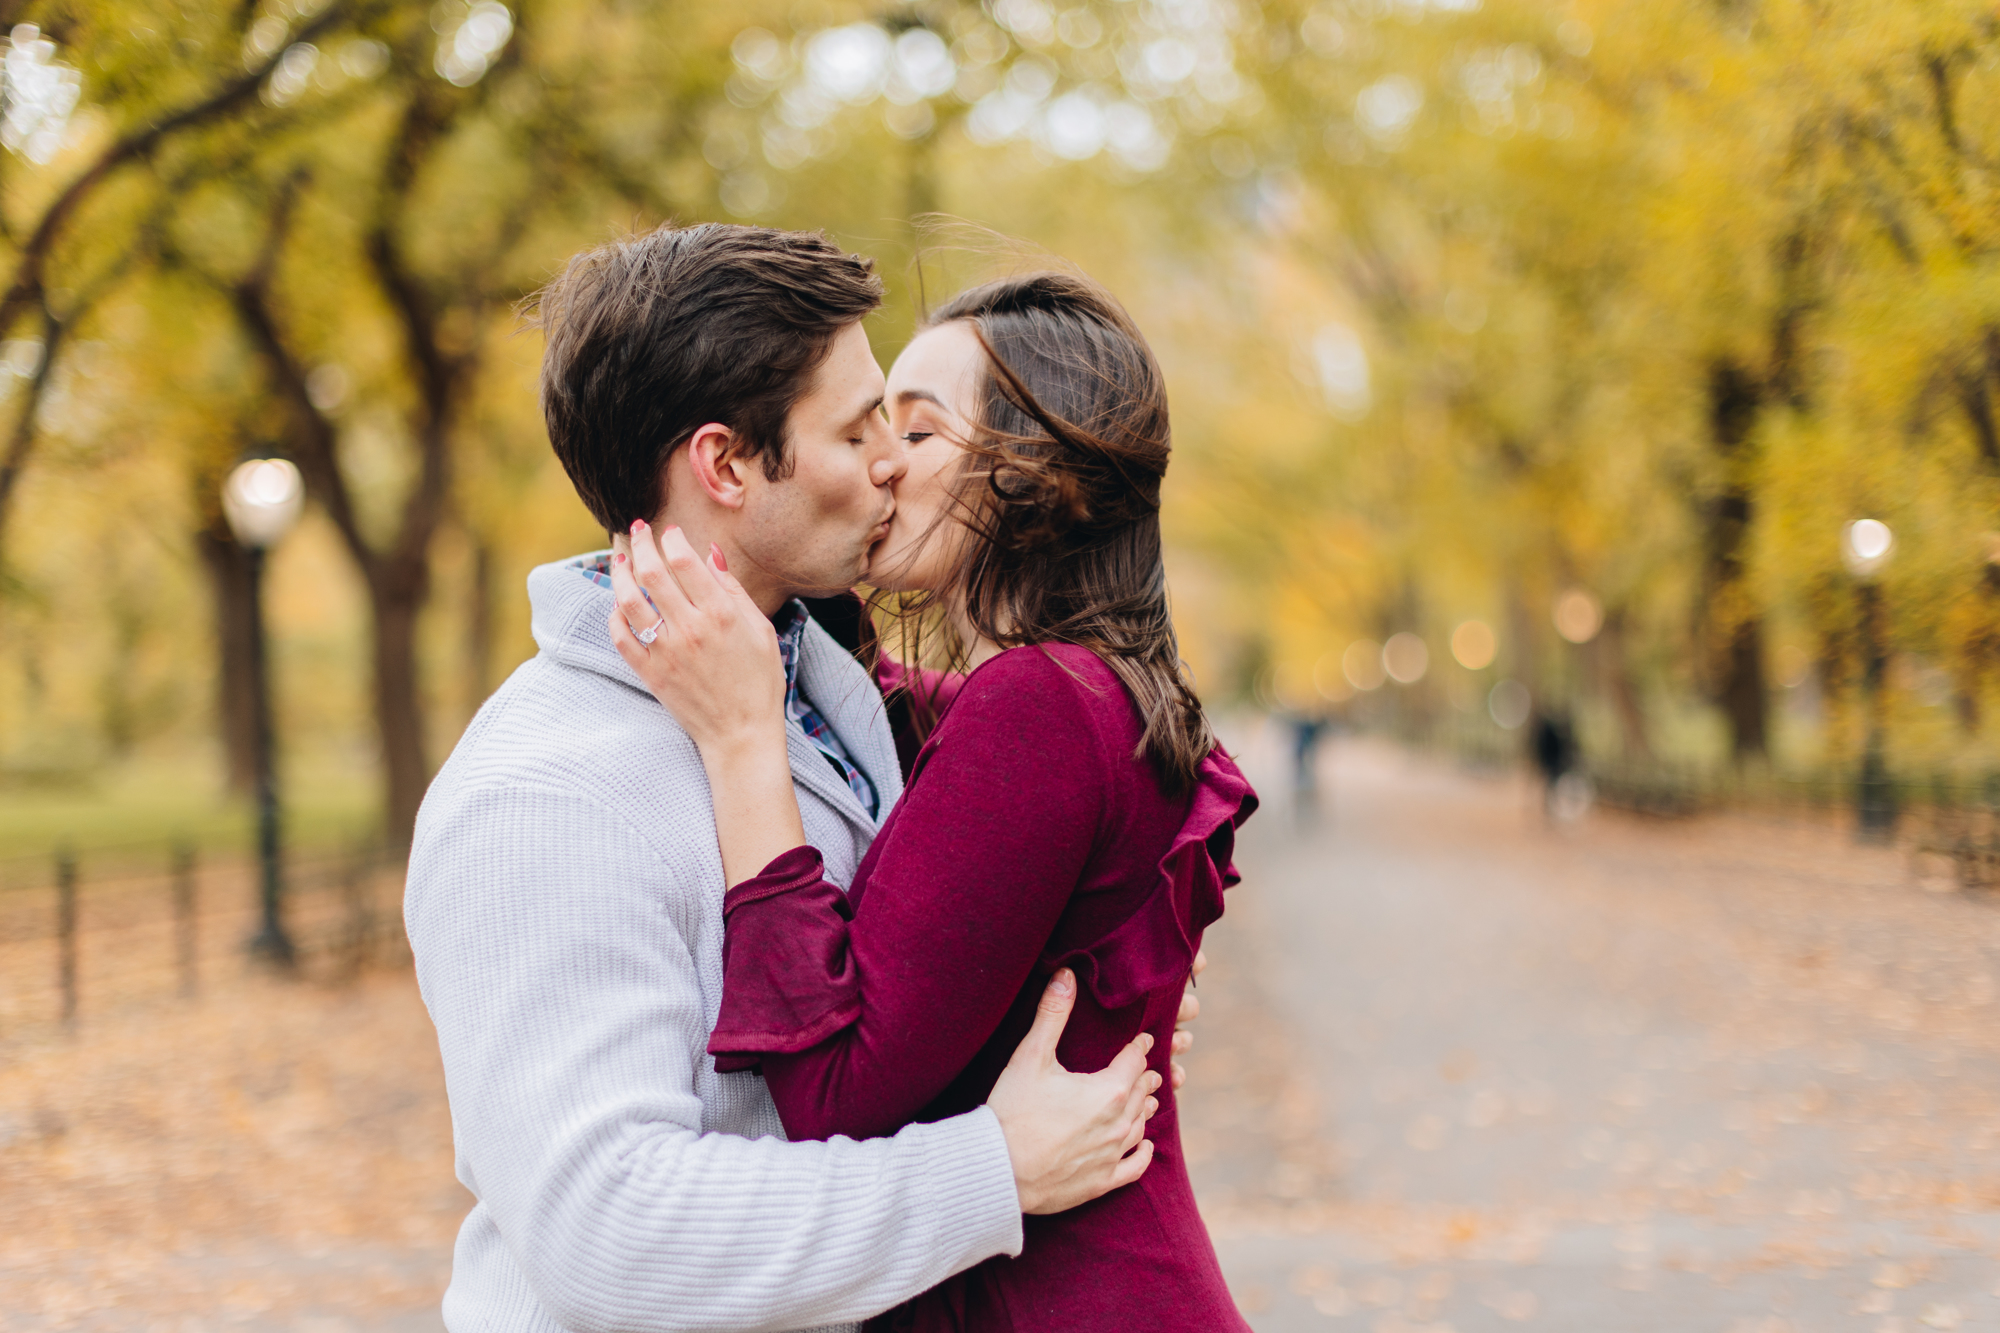 Top Locations in Central Park for Engagement Photography